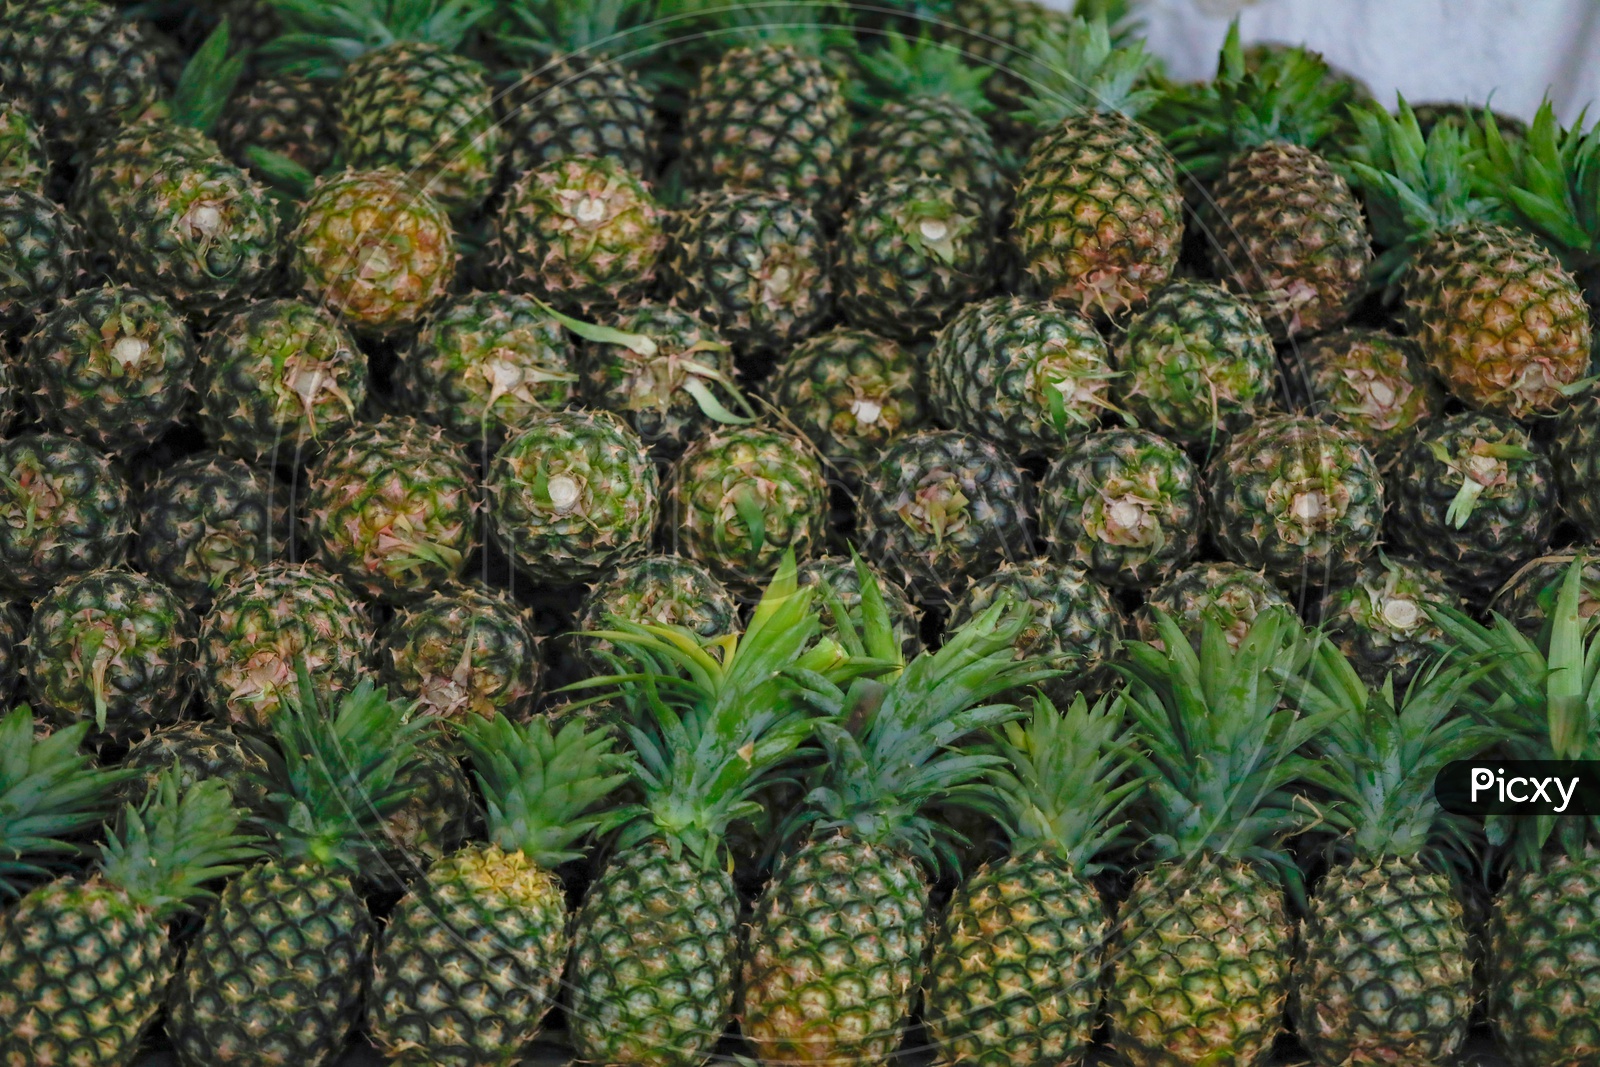 Pineapple  in a Fruit Vendor Shop Or Stall